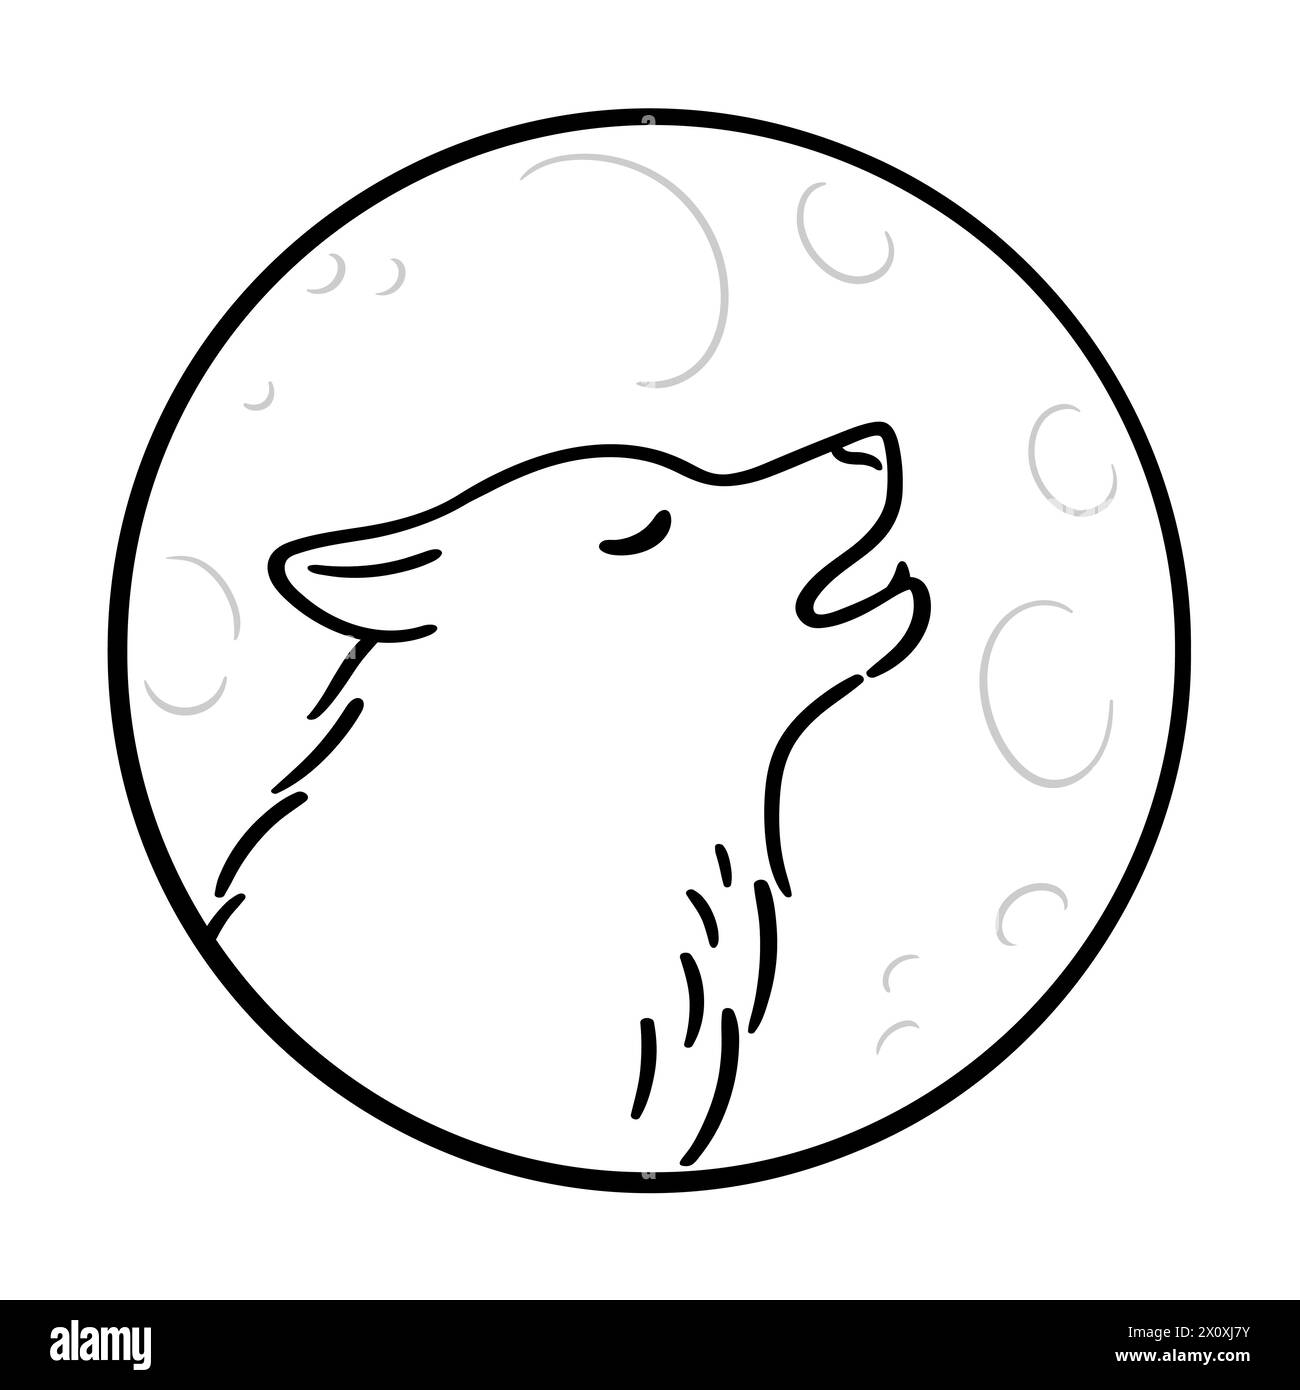 Wolf howling at moon, black and white line art drawing. Simple doodle of wolf head profile in circle. Vector illustration. Stock Vector